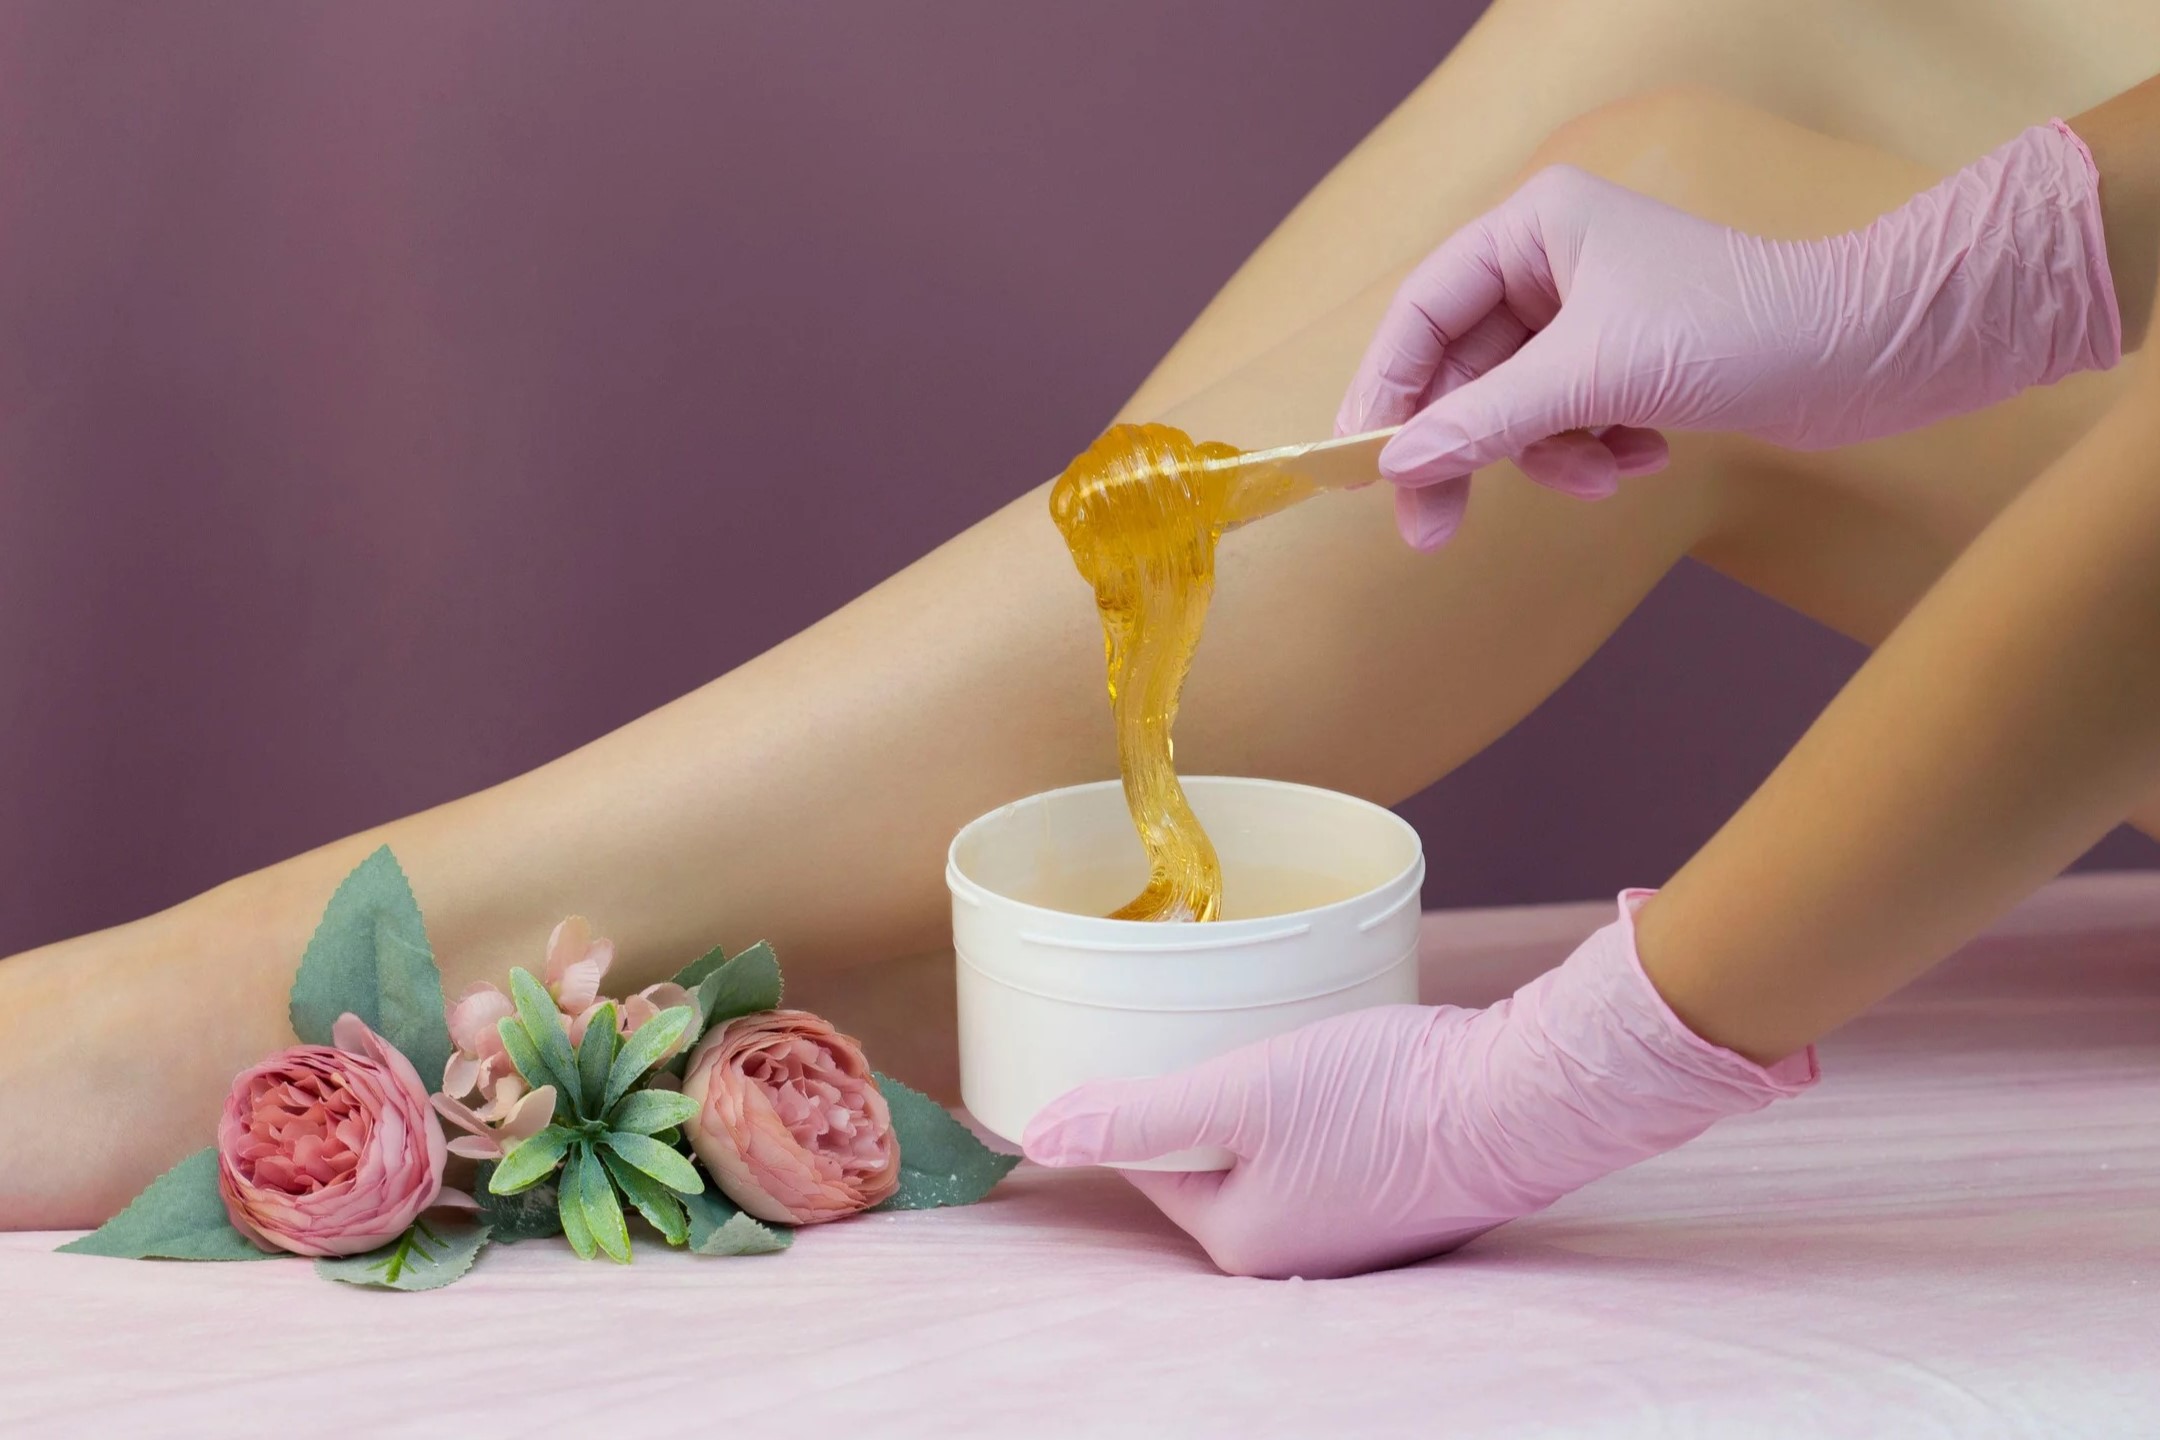 The Ultimate Guide To Brazilian Waxing: Results, Regrowth, Pain, And Frequency